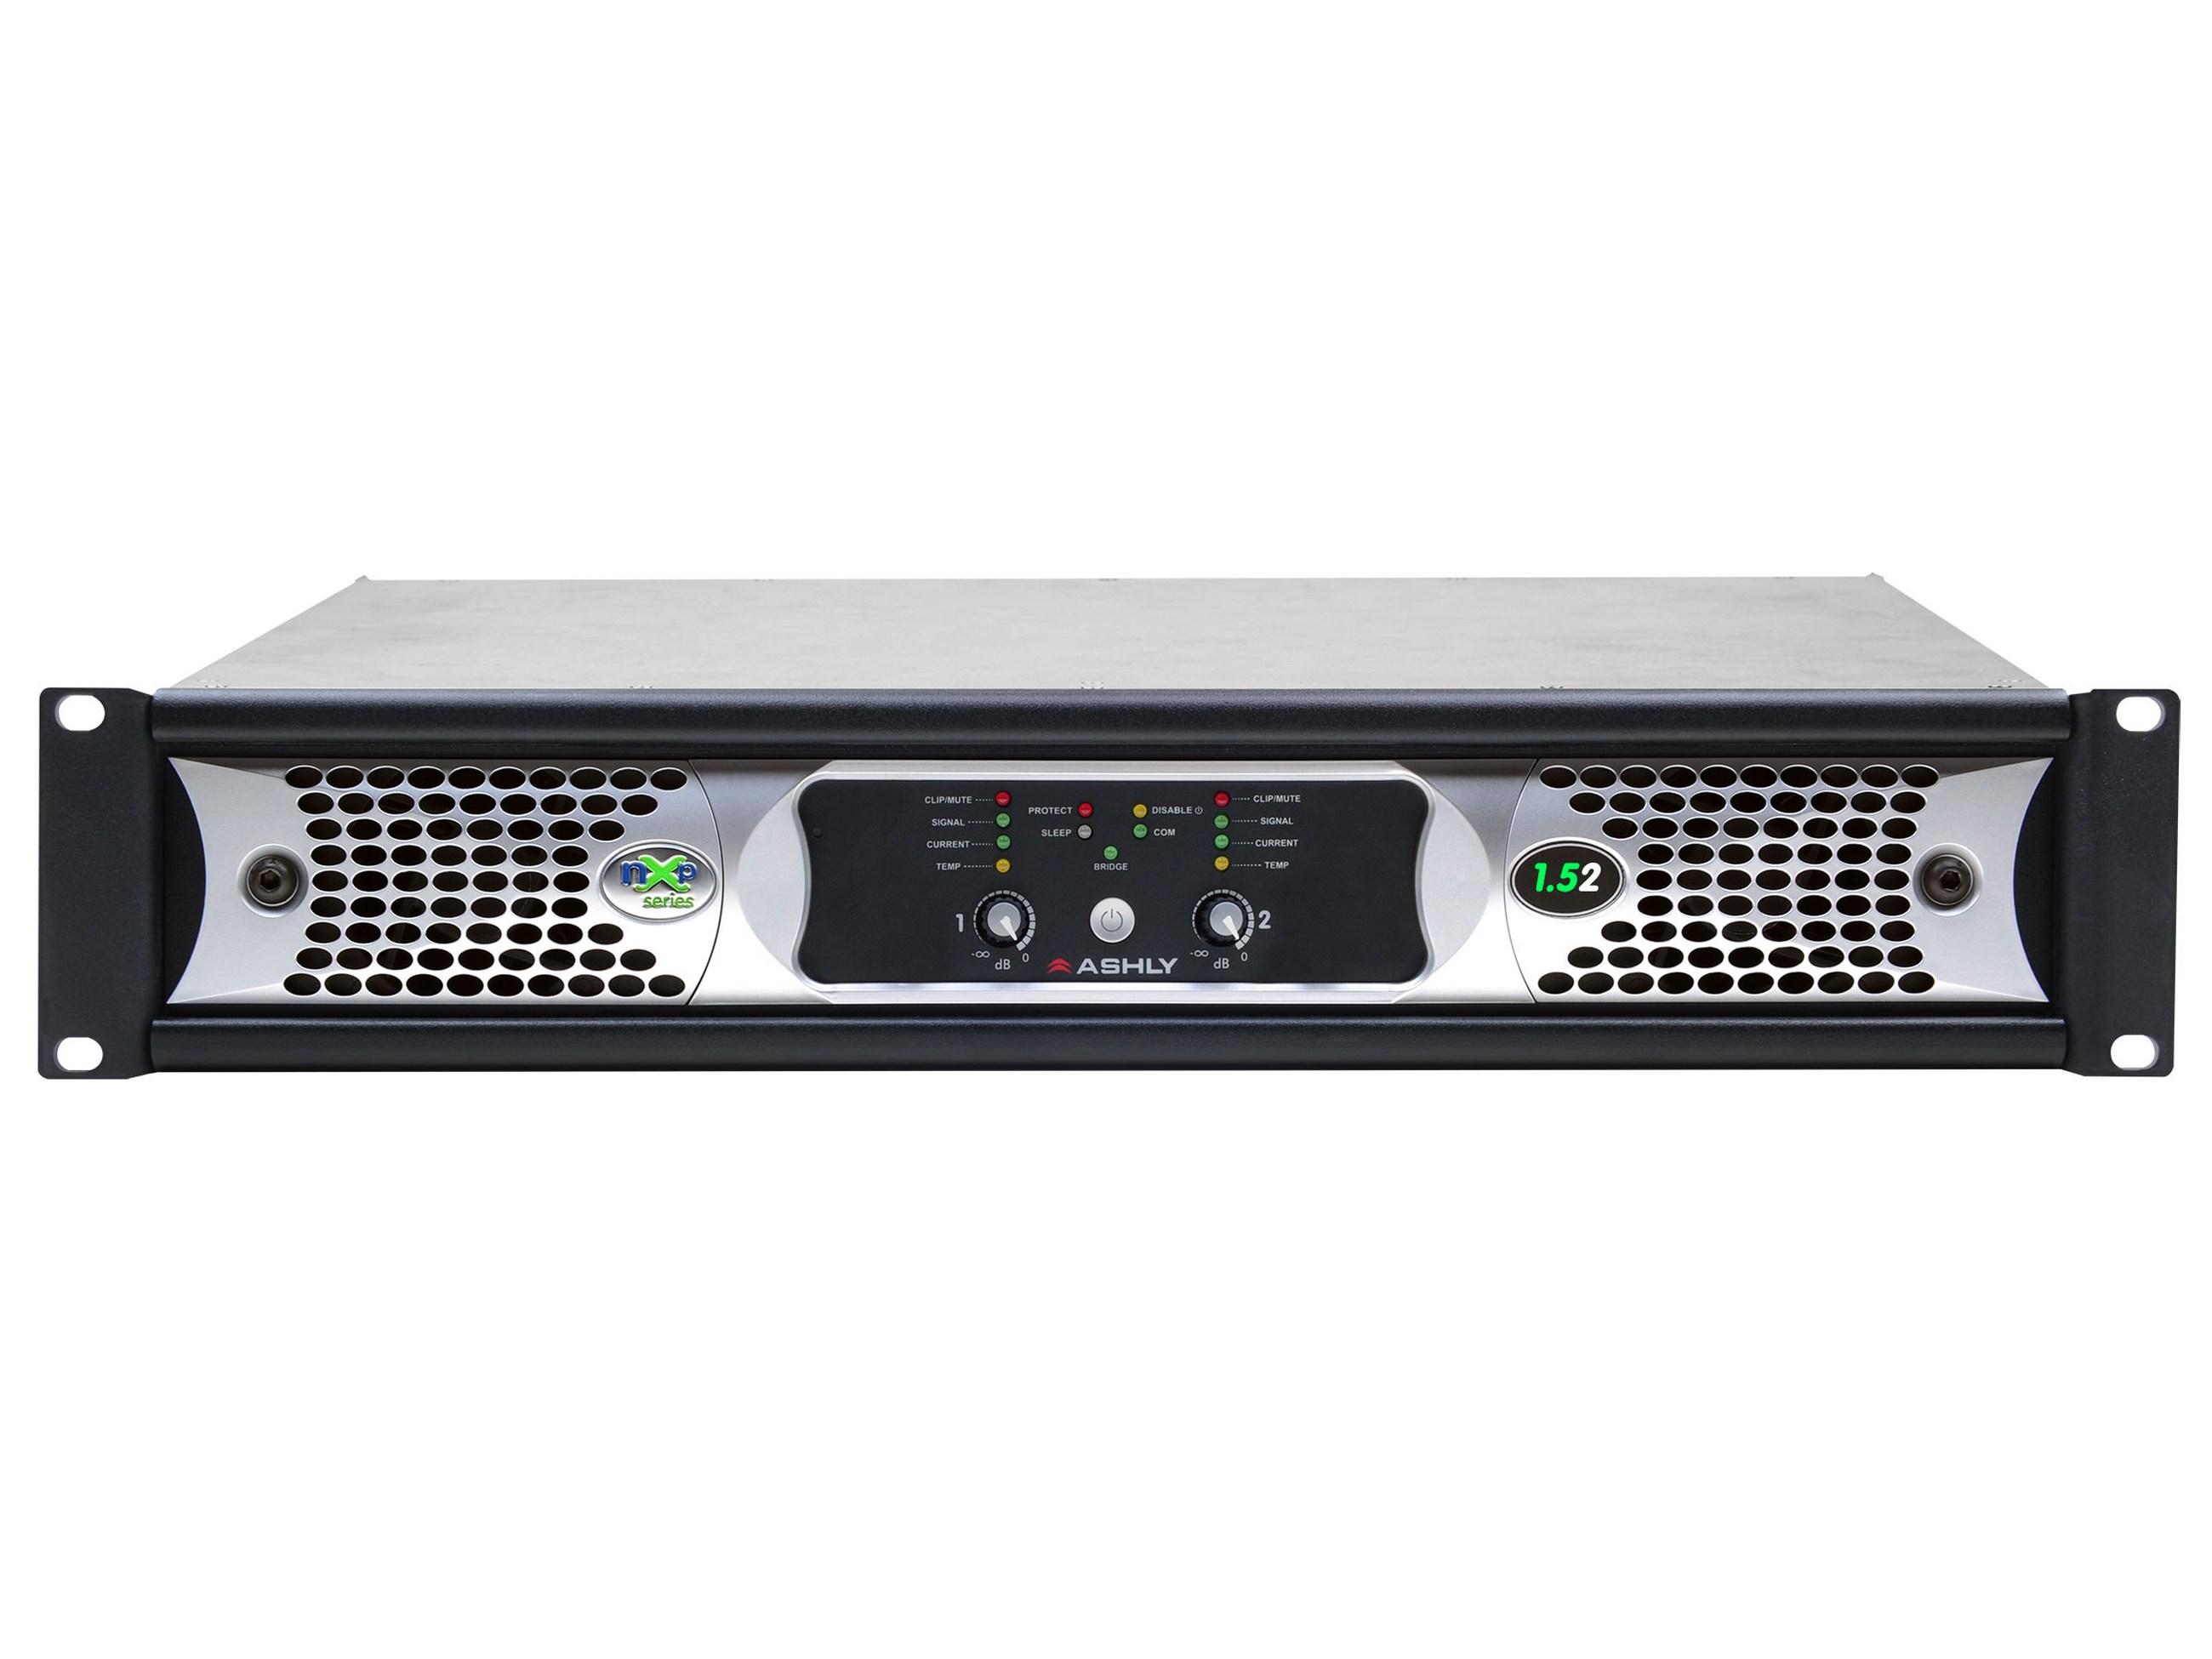 nXp1.52d 2x 1500 Watts/2 Ohms Network Power Amplifier with Protea DSP and OPDante Option Card by Ashly